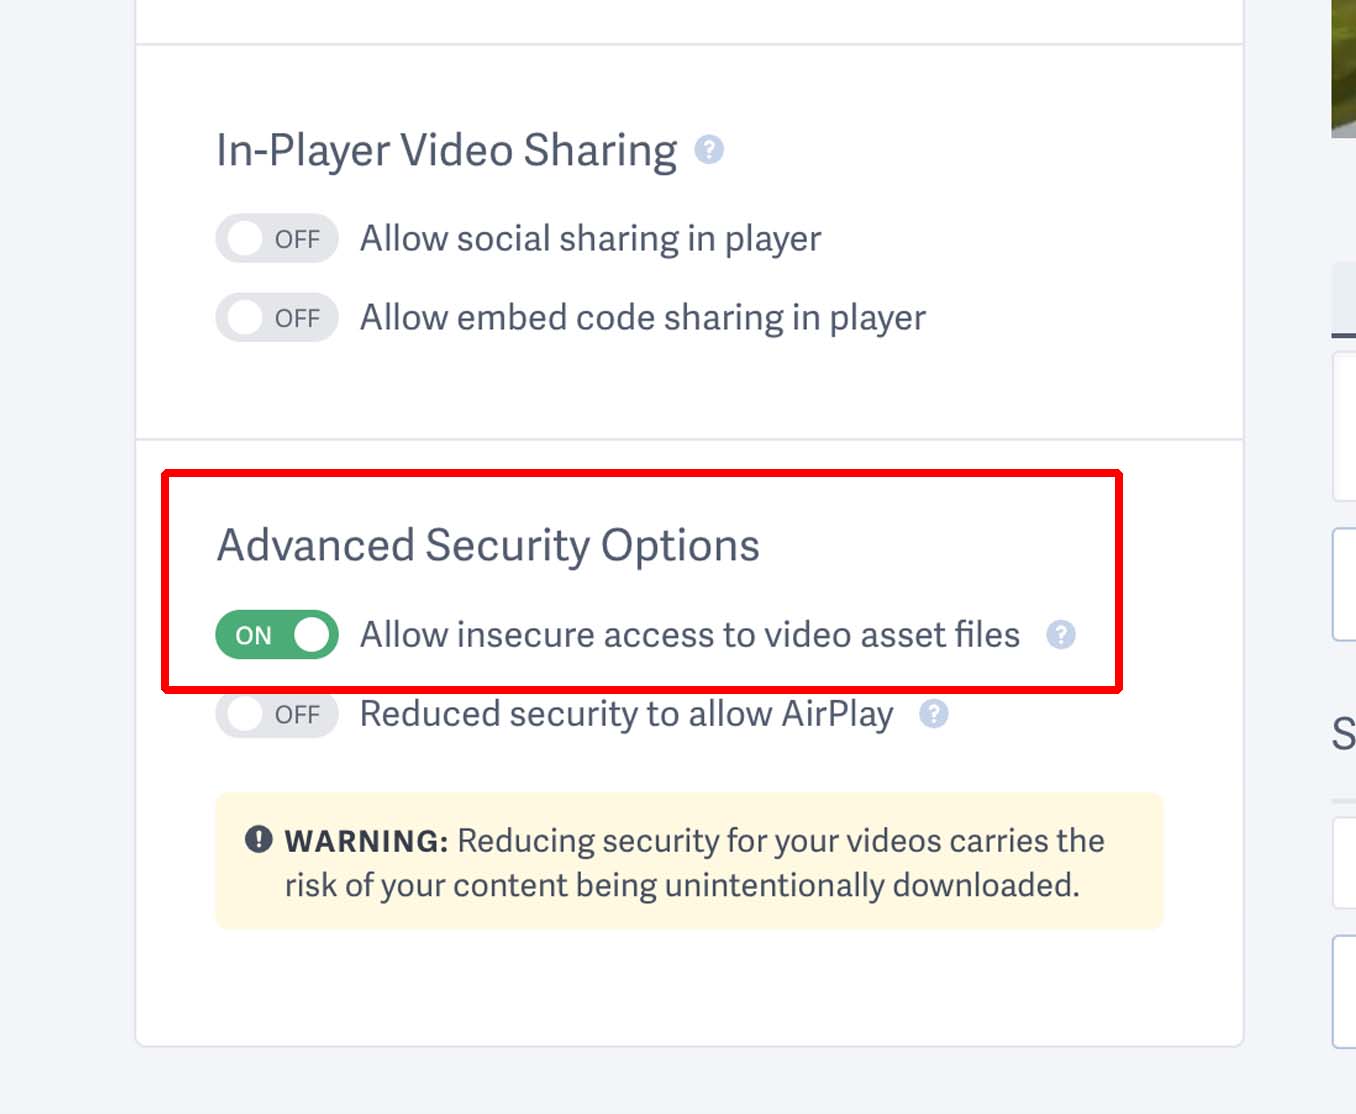 Enable 'Allow insecure access to video asset files' in Advanced Security Options